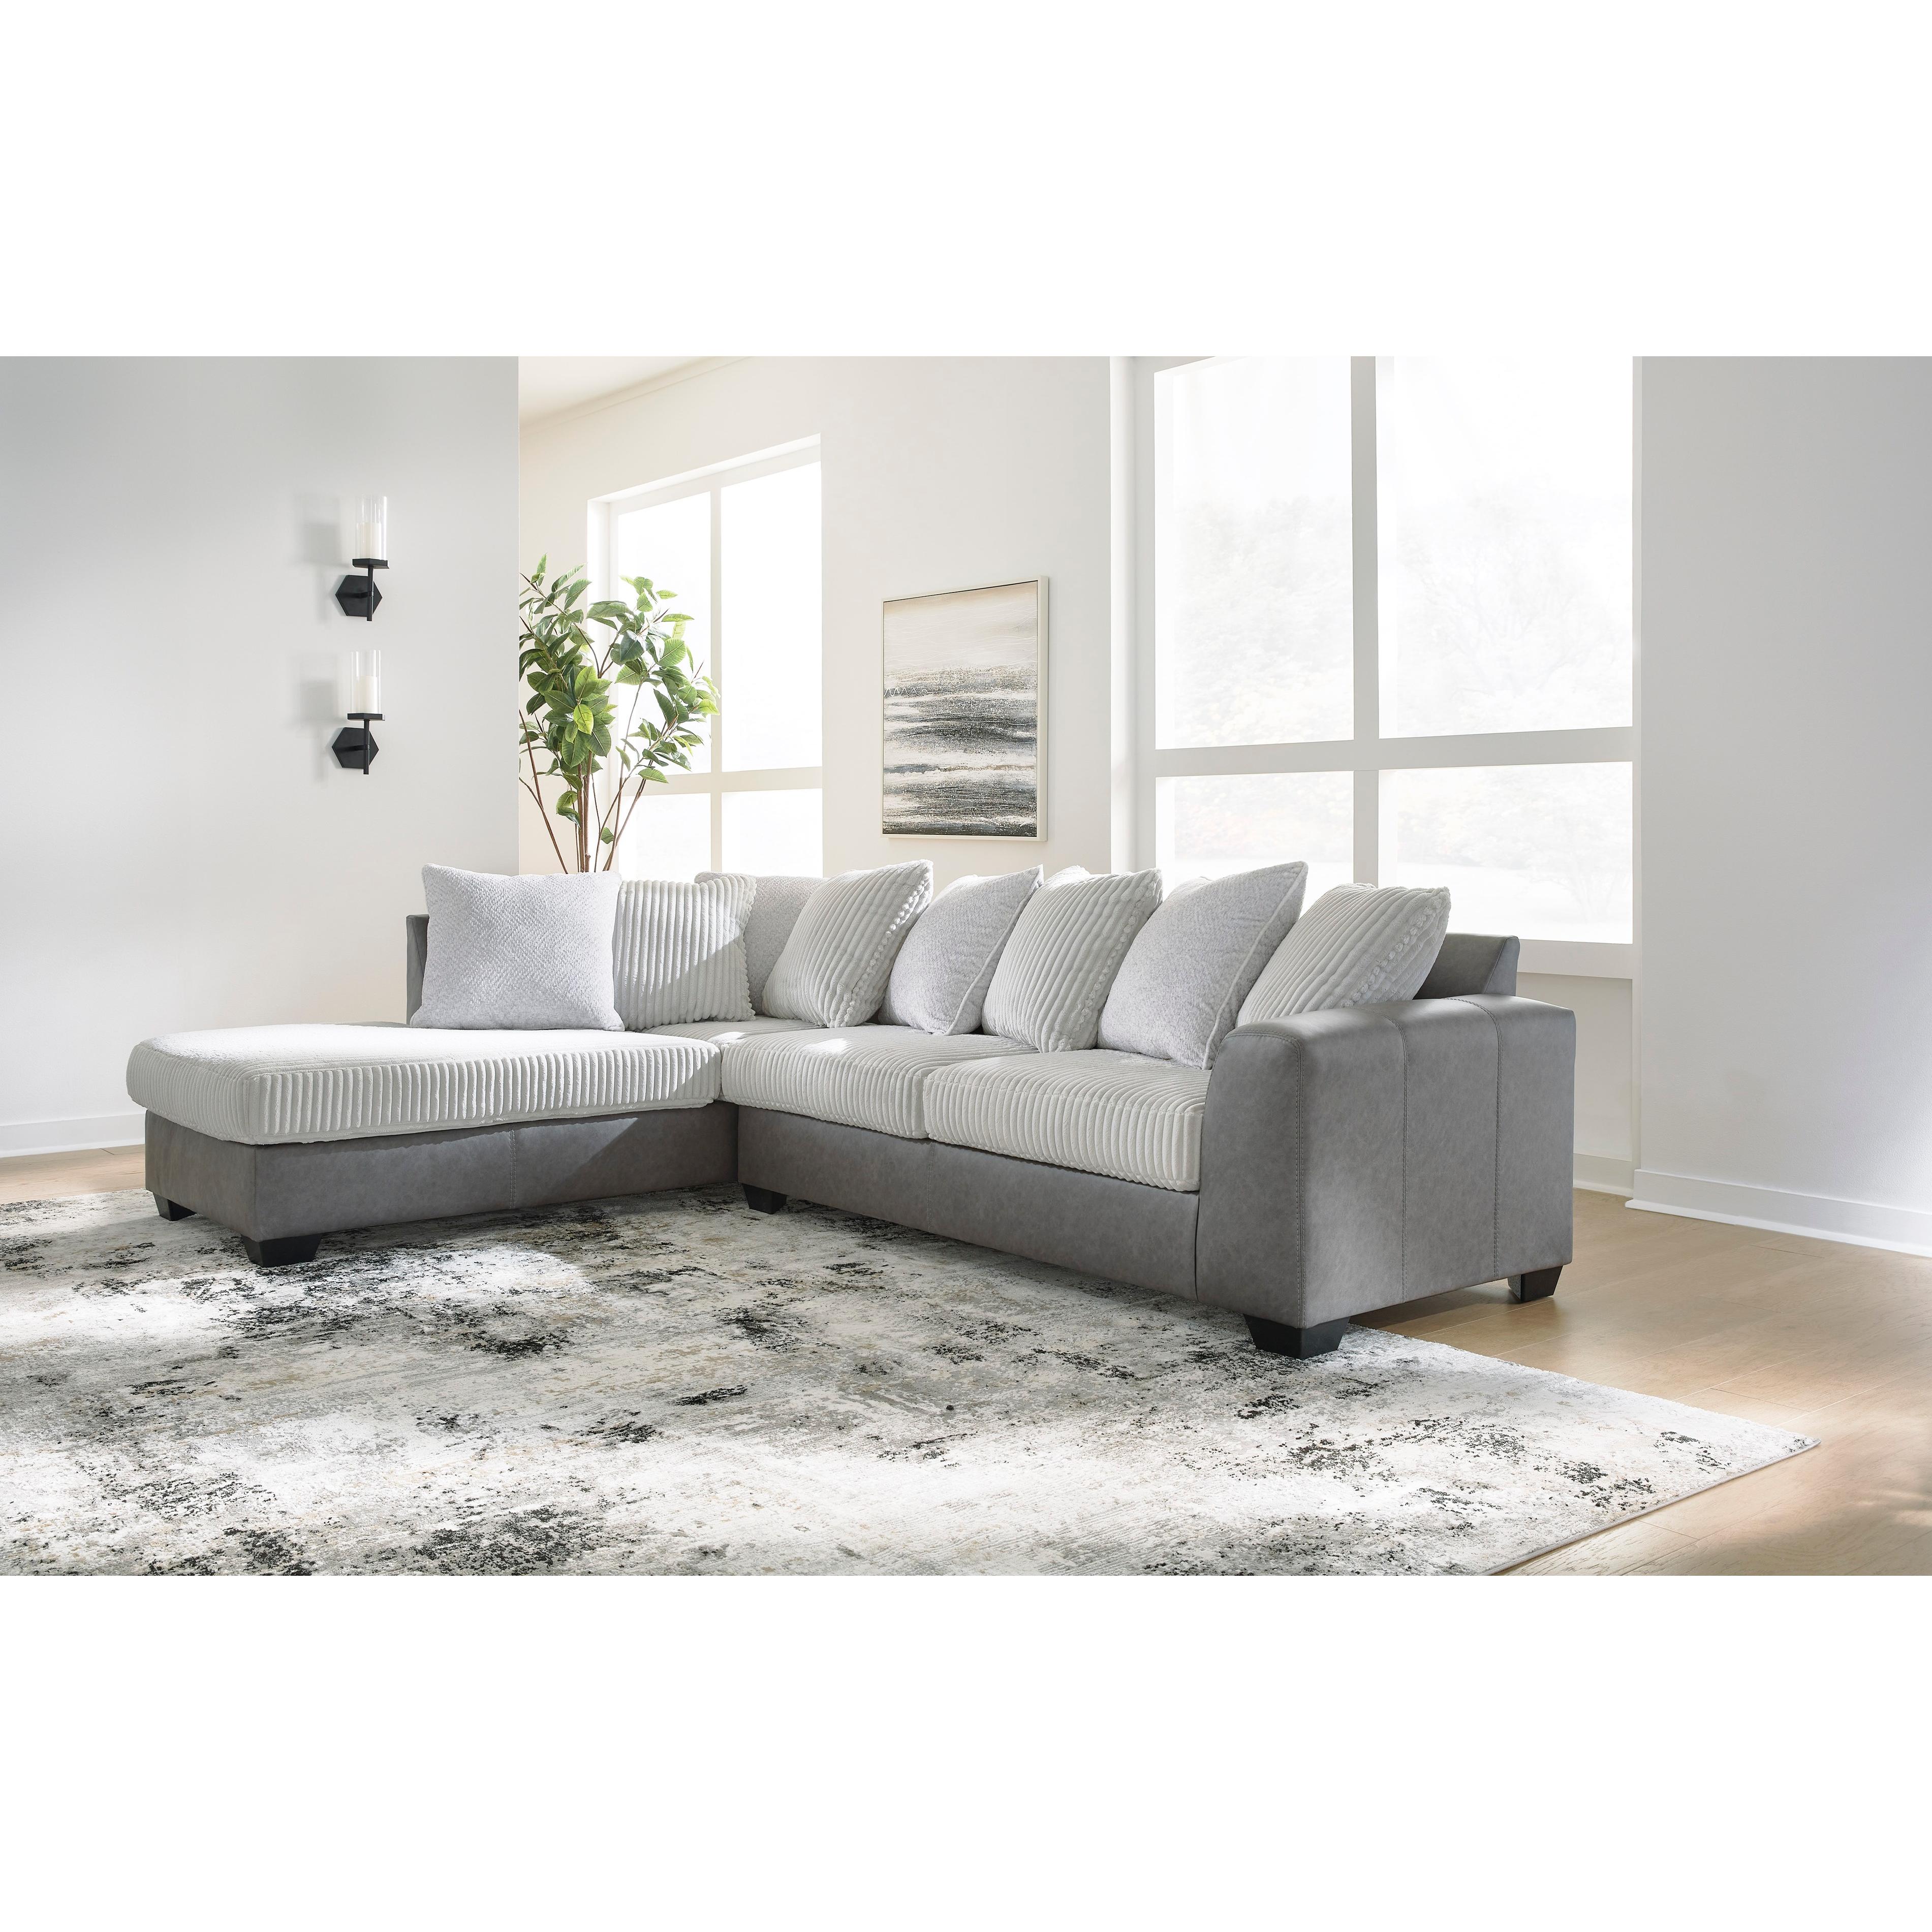 Benchcraft Clairette Court 2 pc Sectional 3150316/3150367 IMAGE 2